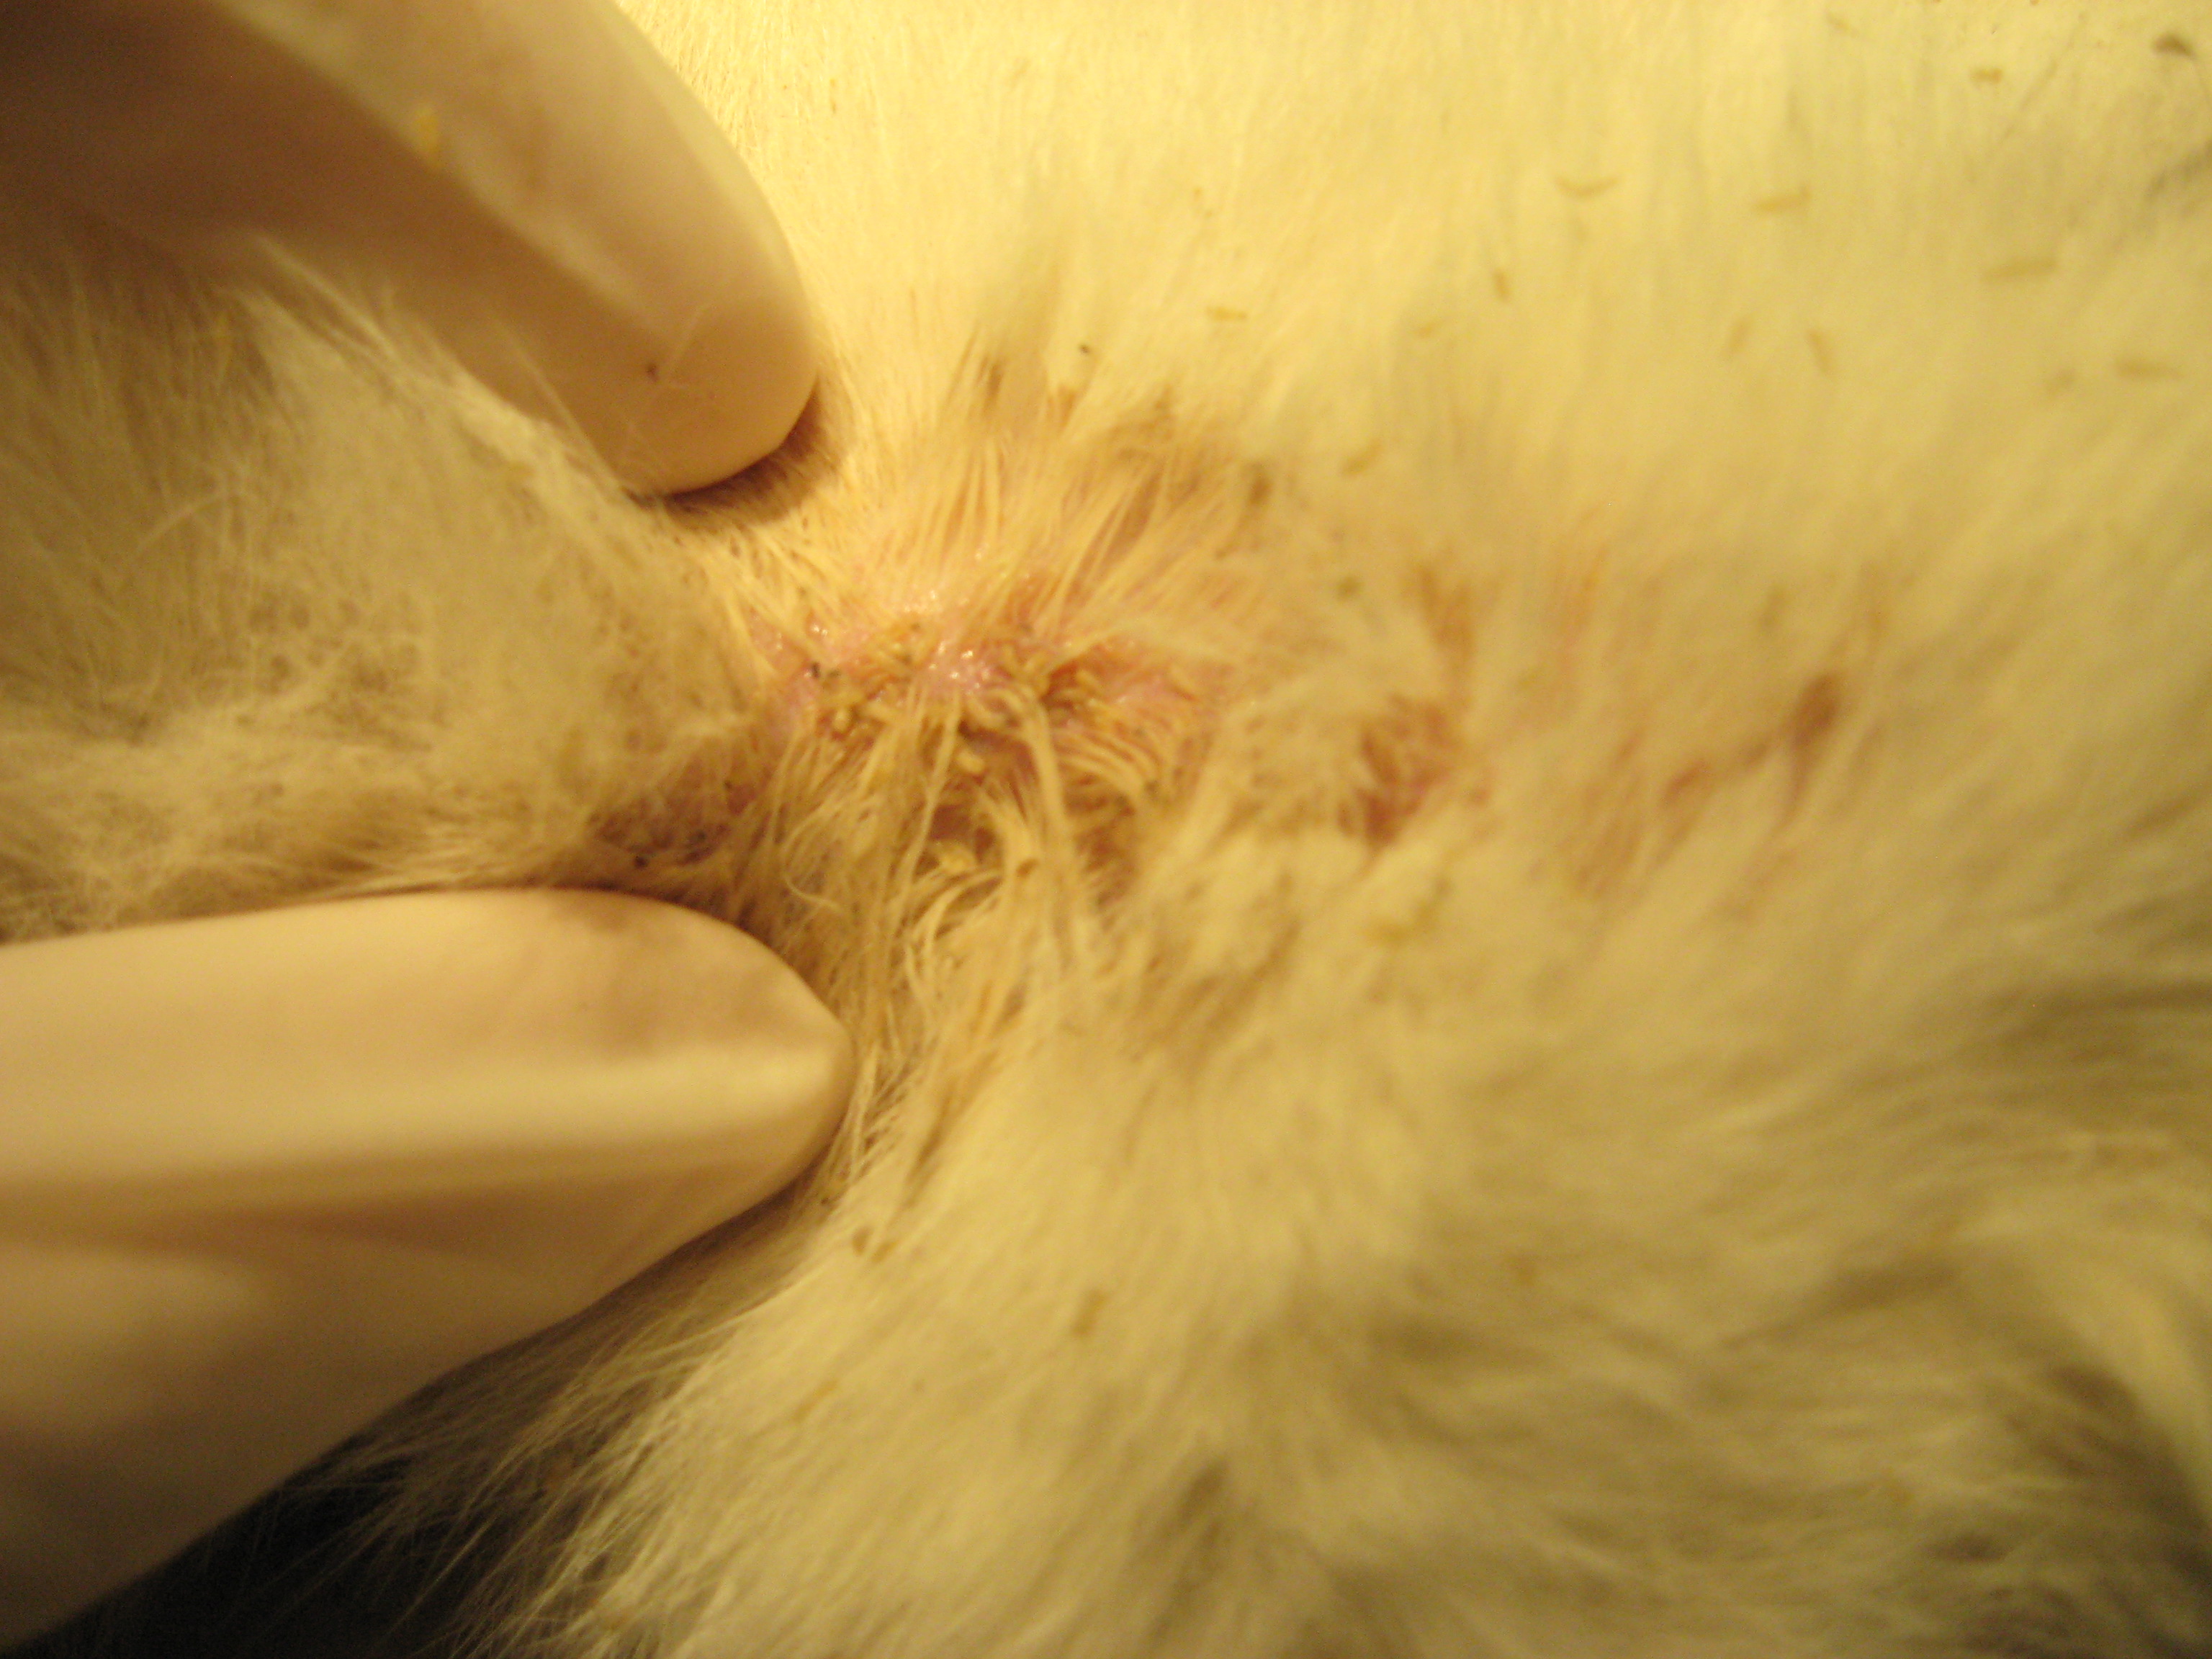 Lice covering the wounds of a feral cat HAHF